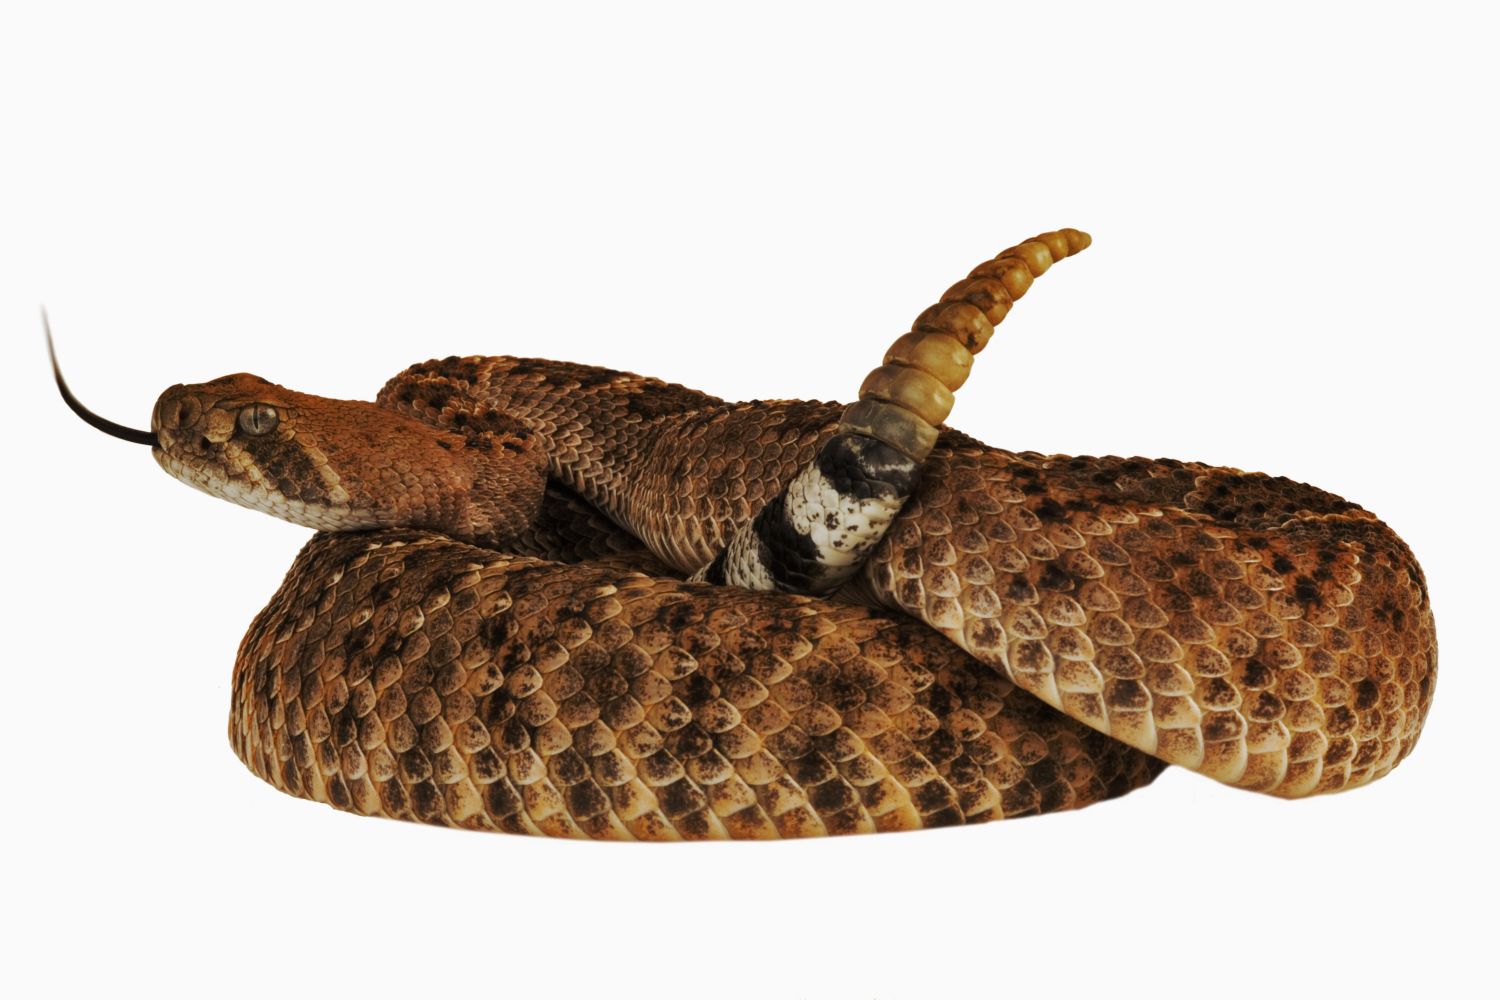 Is a Rattlesnake a Carnivore?